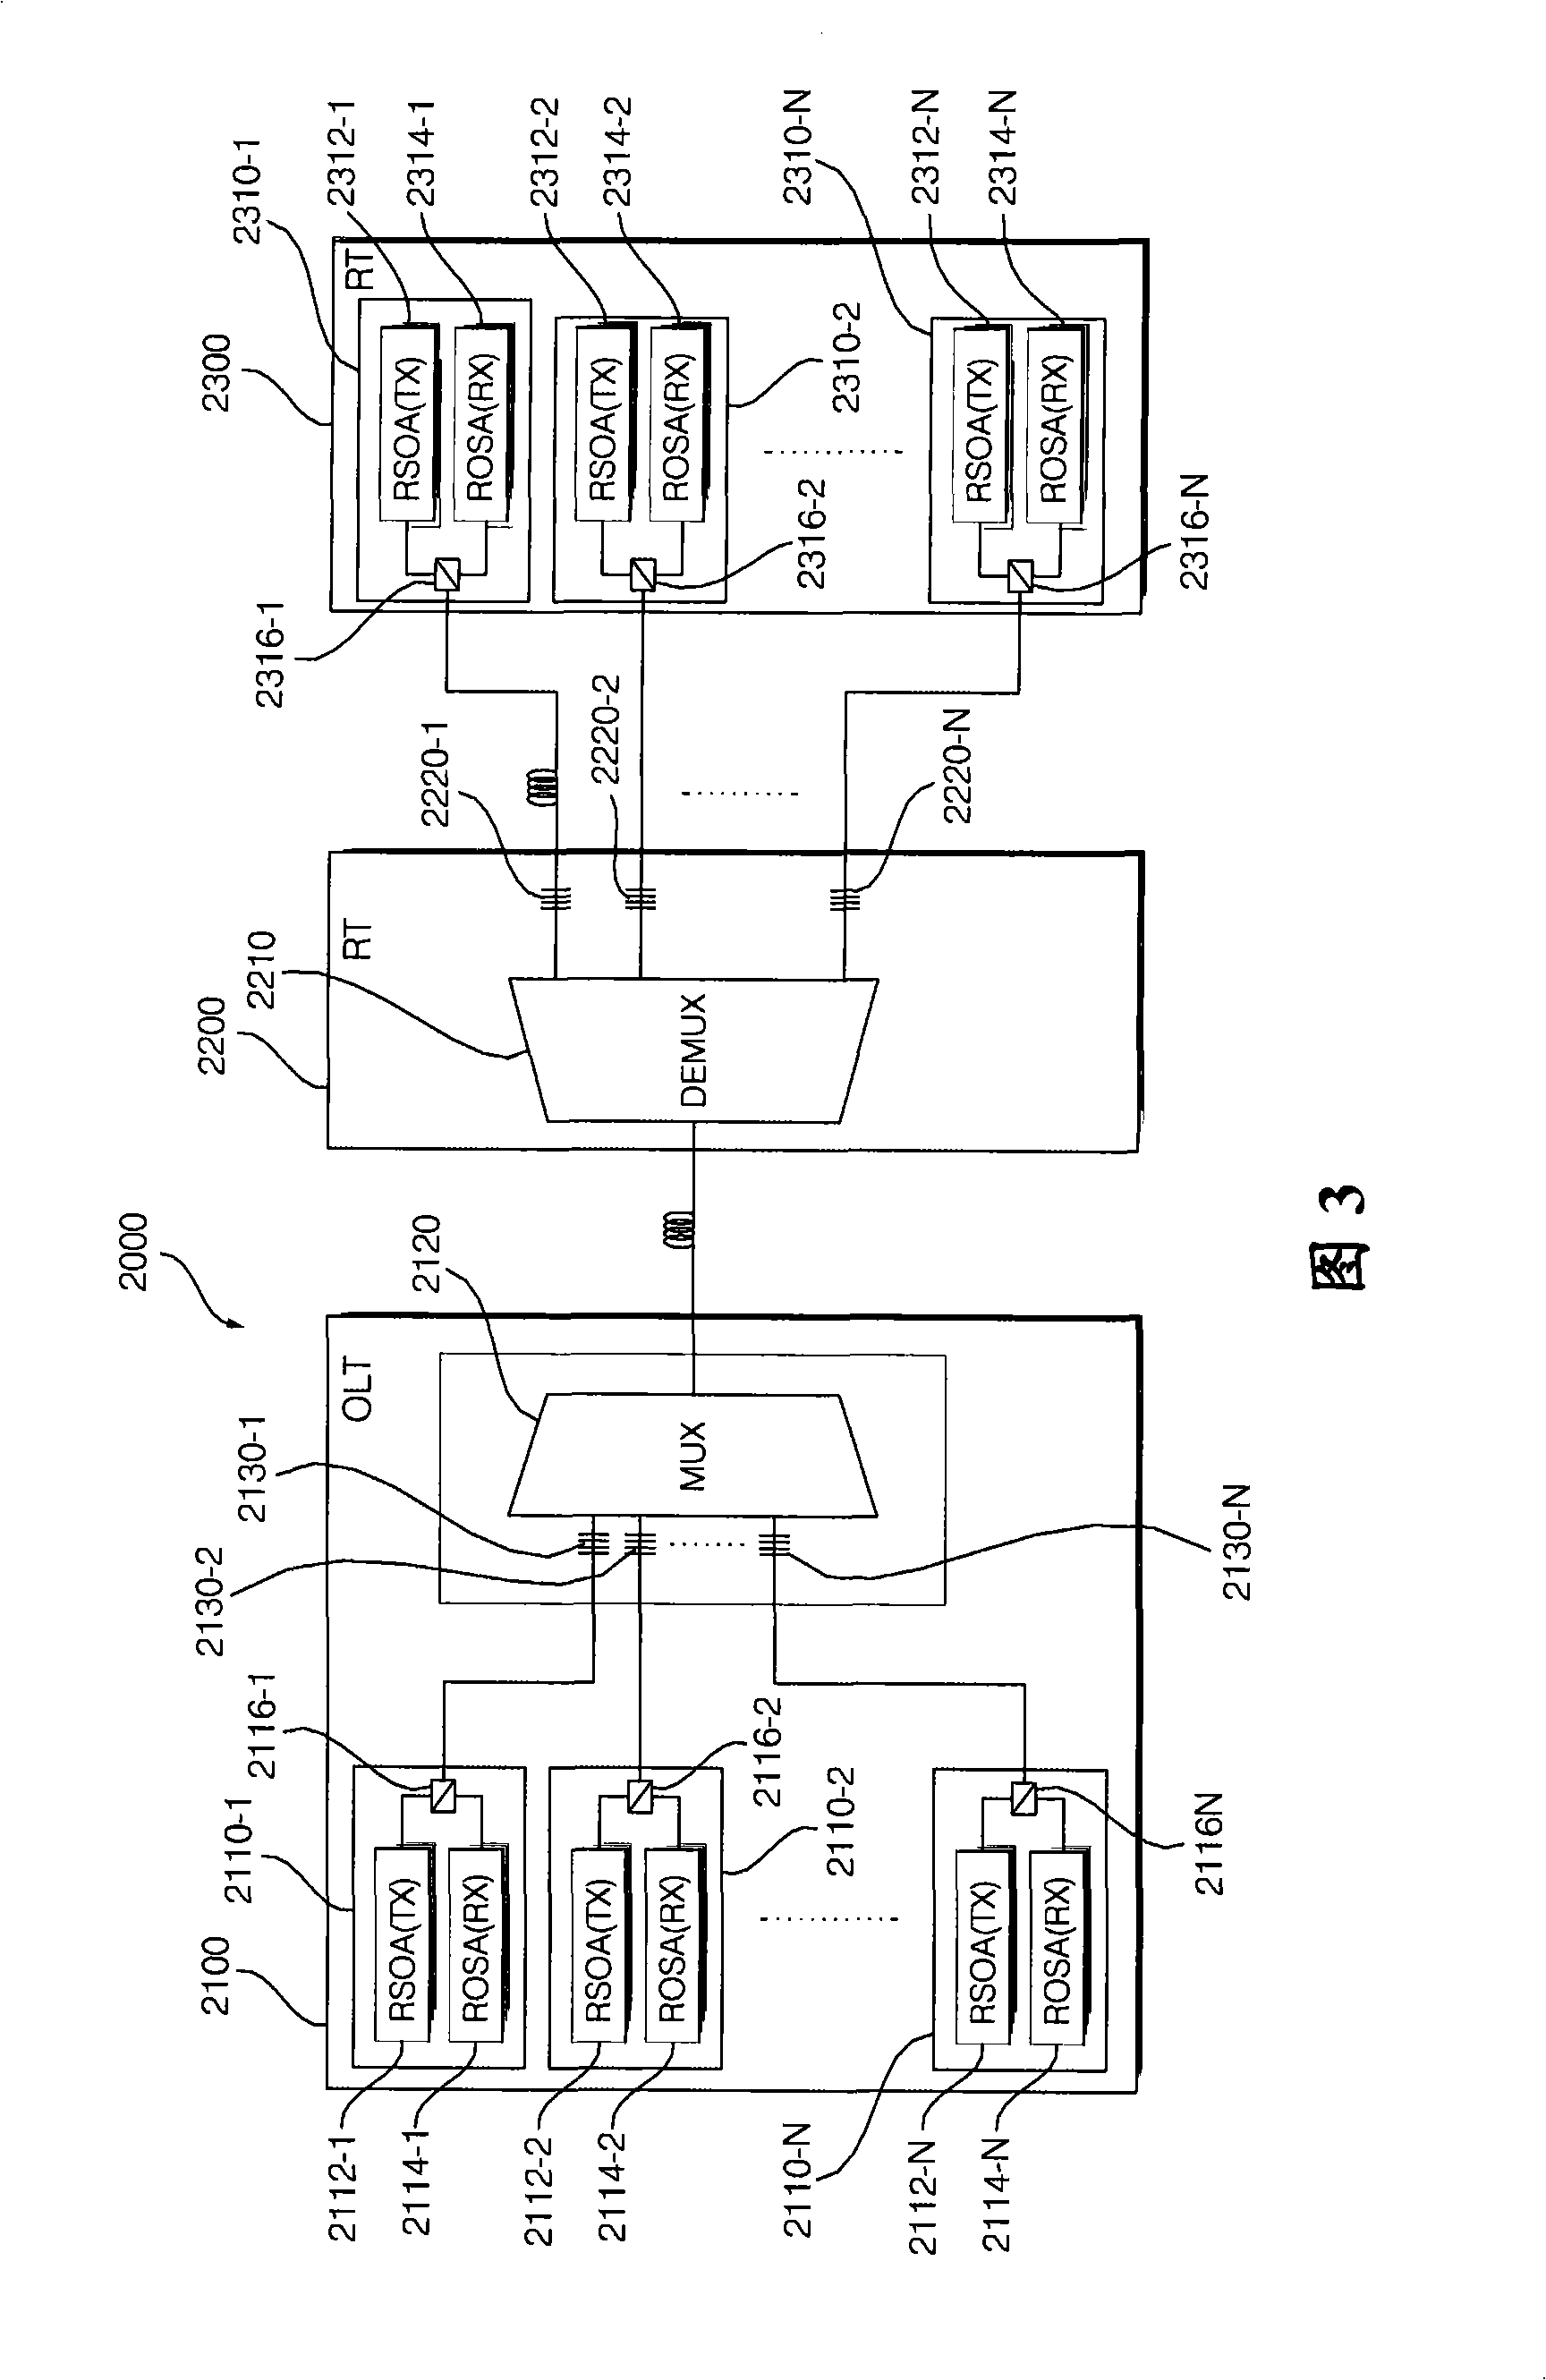 WDM-PON system using self-injection locking, optical line terminal thereof, and data transmission method